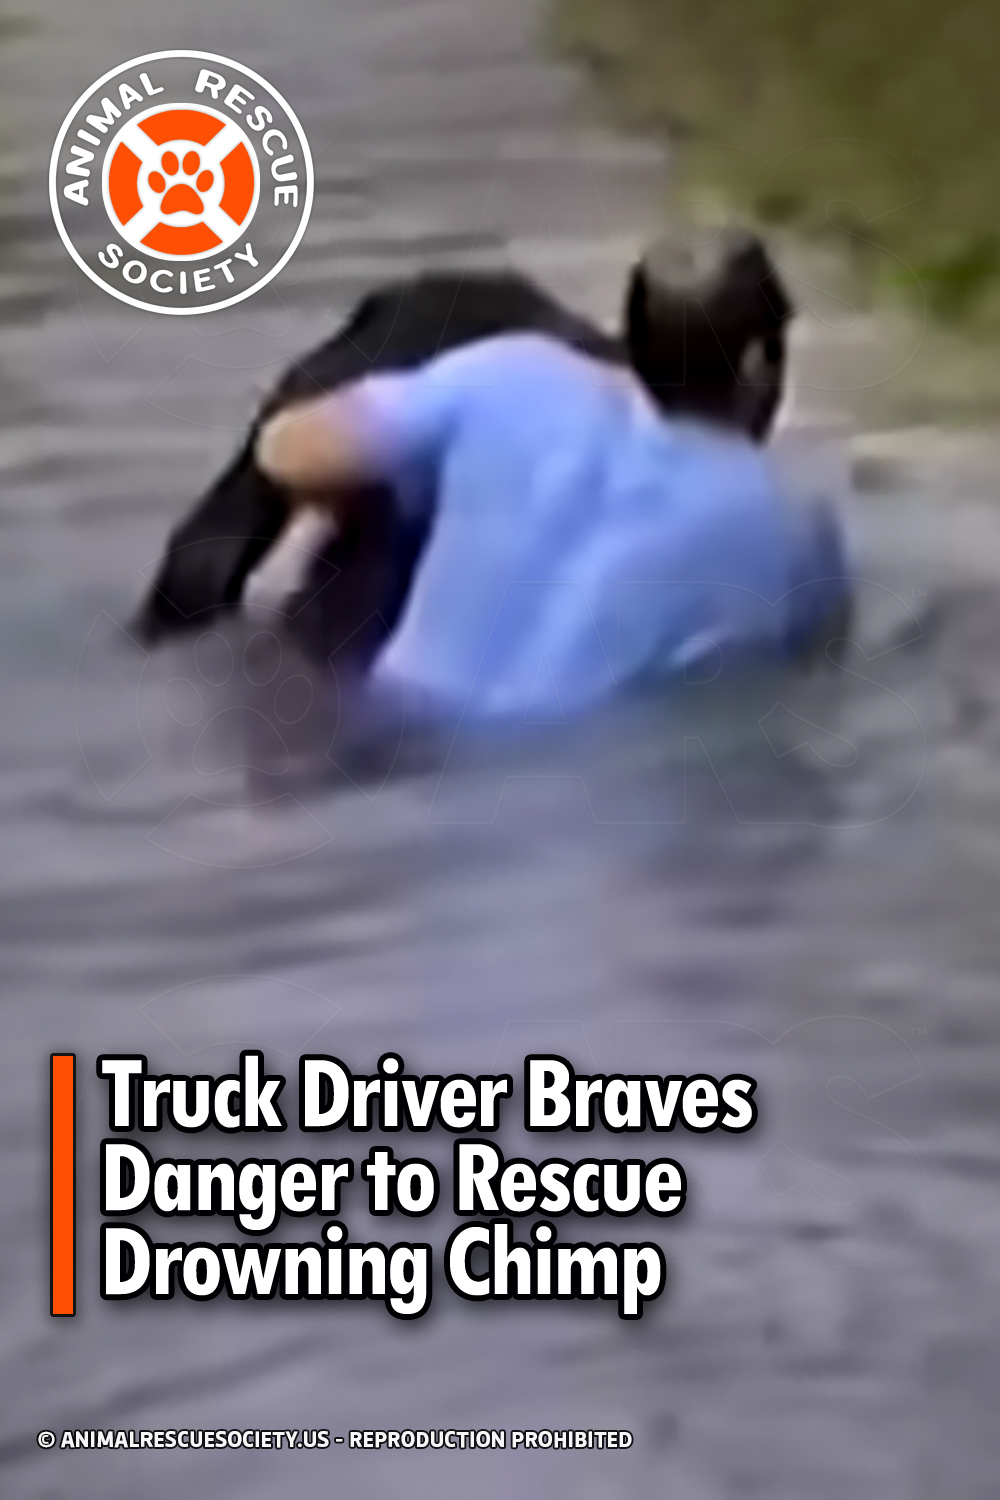 Truck Driver Braves Danger to Rescue Drowning Chimp